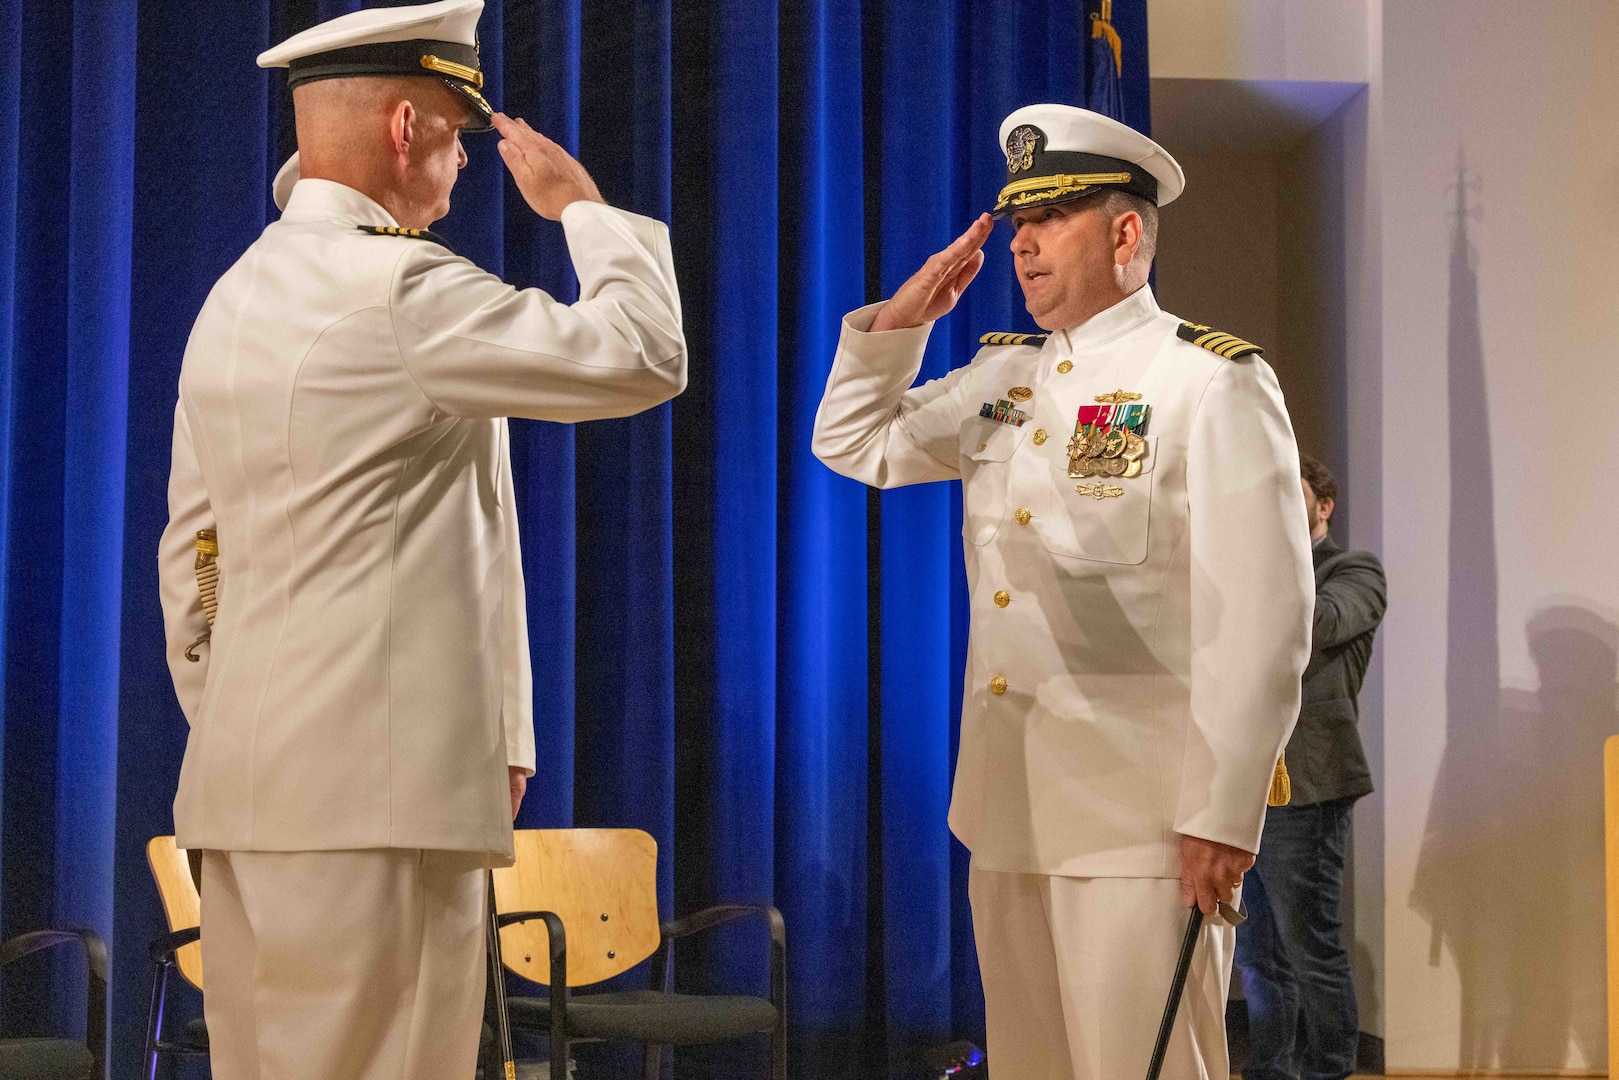 Naval Surface Warfare Center, Carderock Division’s outgoing Commanding Officer, Capt. Todd E. Hutchison (left), salutes Carderock’s incoming Commanding Officer, Capt. Matthew Tardy, during a change-of-command ceremony held in West Bethesda, Md., on May 12. (U.S. Navy photo by Aaron Thomas)